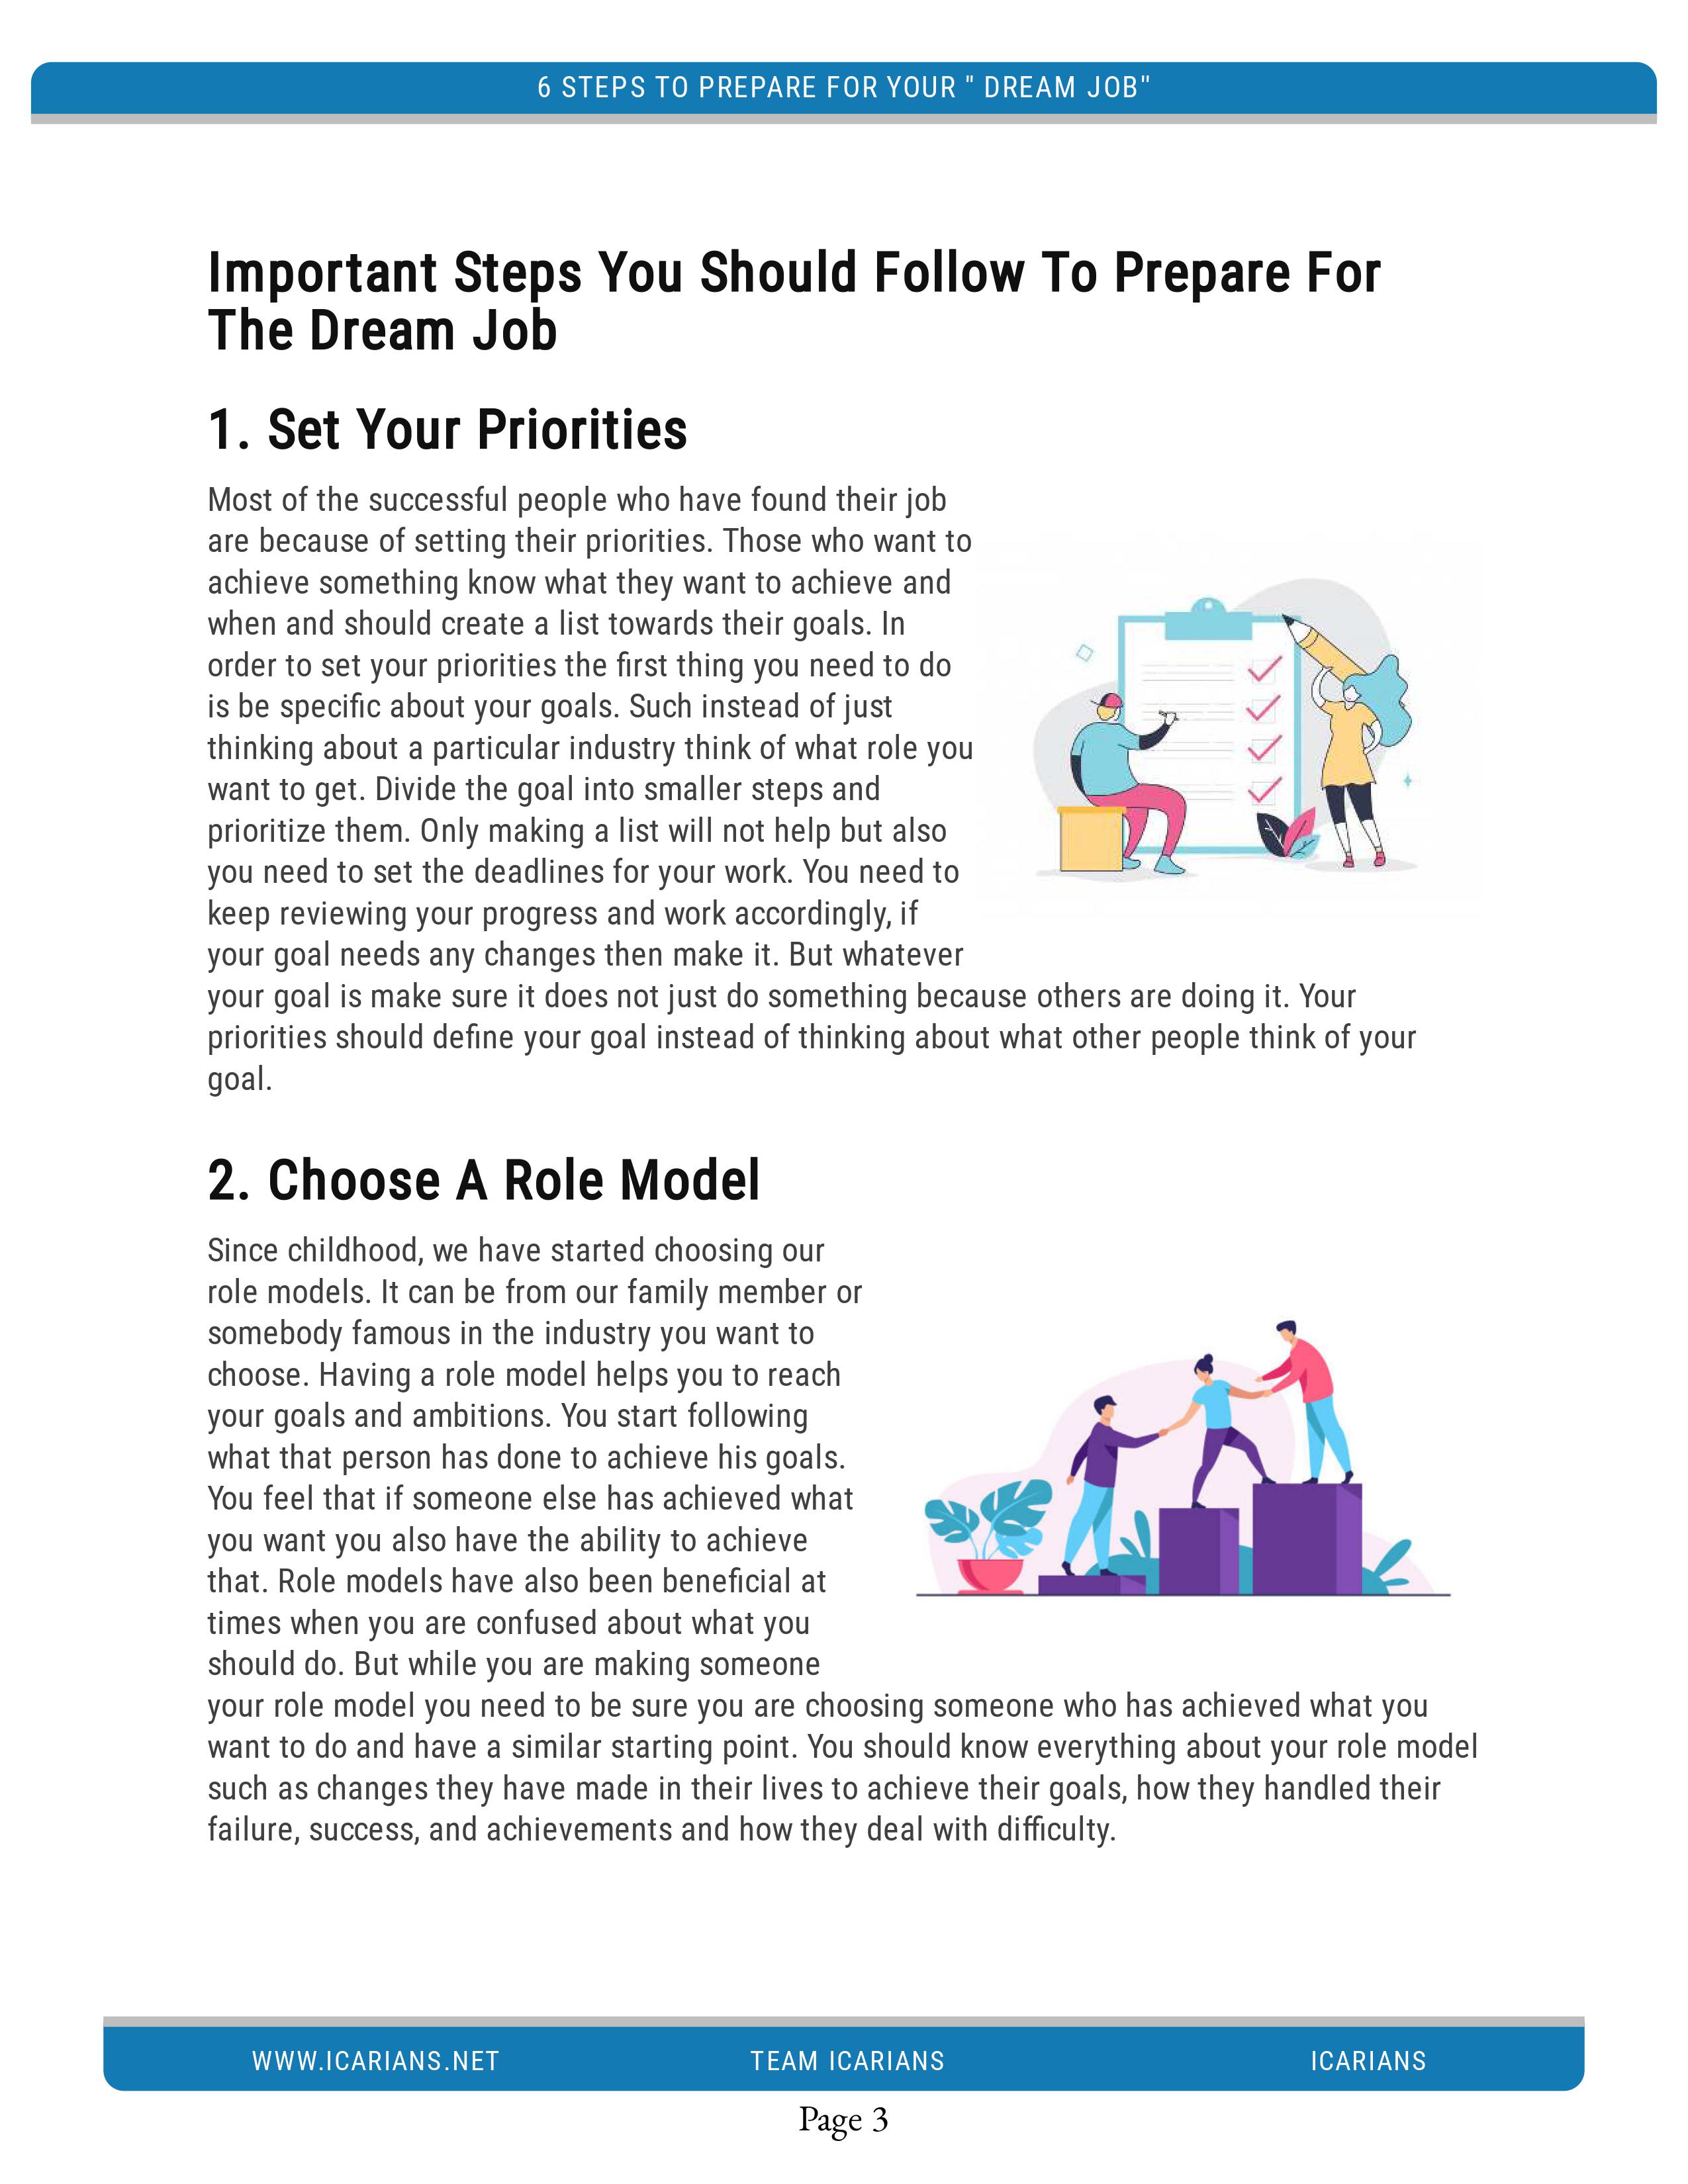 6 Steps To Prepare For Your “Dream Job “